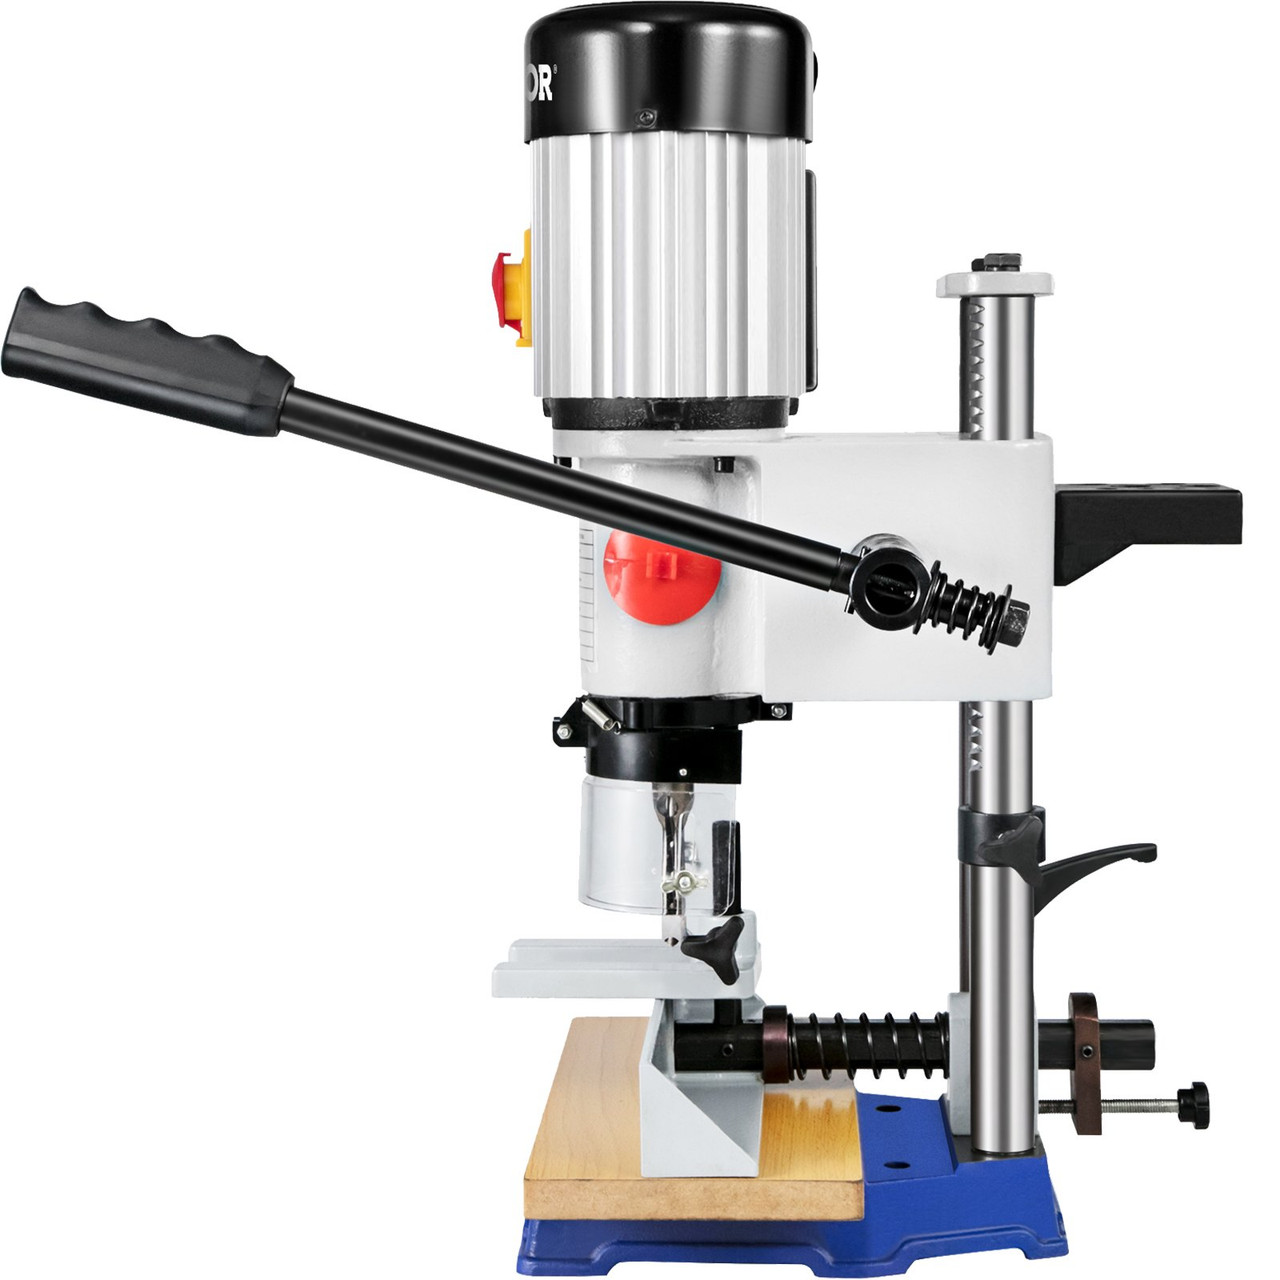 Woodworking Mortise Machine, 3/4 HP 3400RPM Powermatic Mortiser With Chisel Bit Sets, Benchtop Mortising Machine, For Making Round Holes Square Holes, Or Special Square Holes In Wood